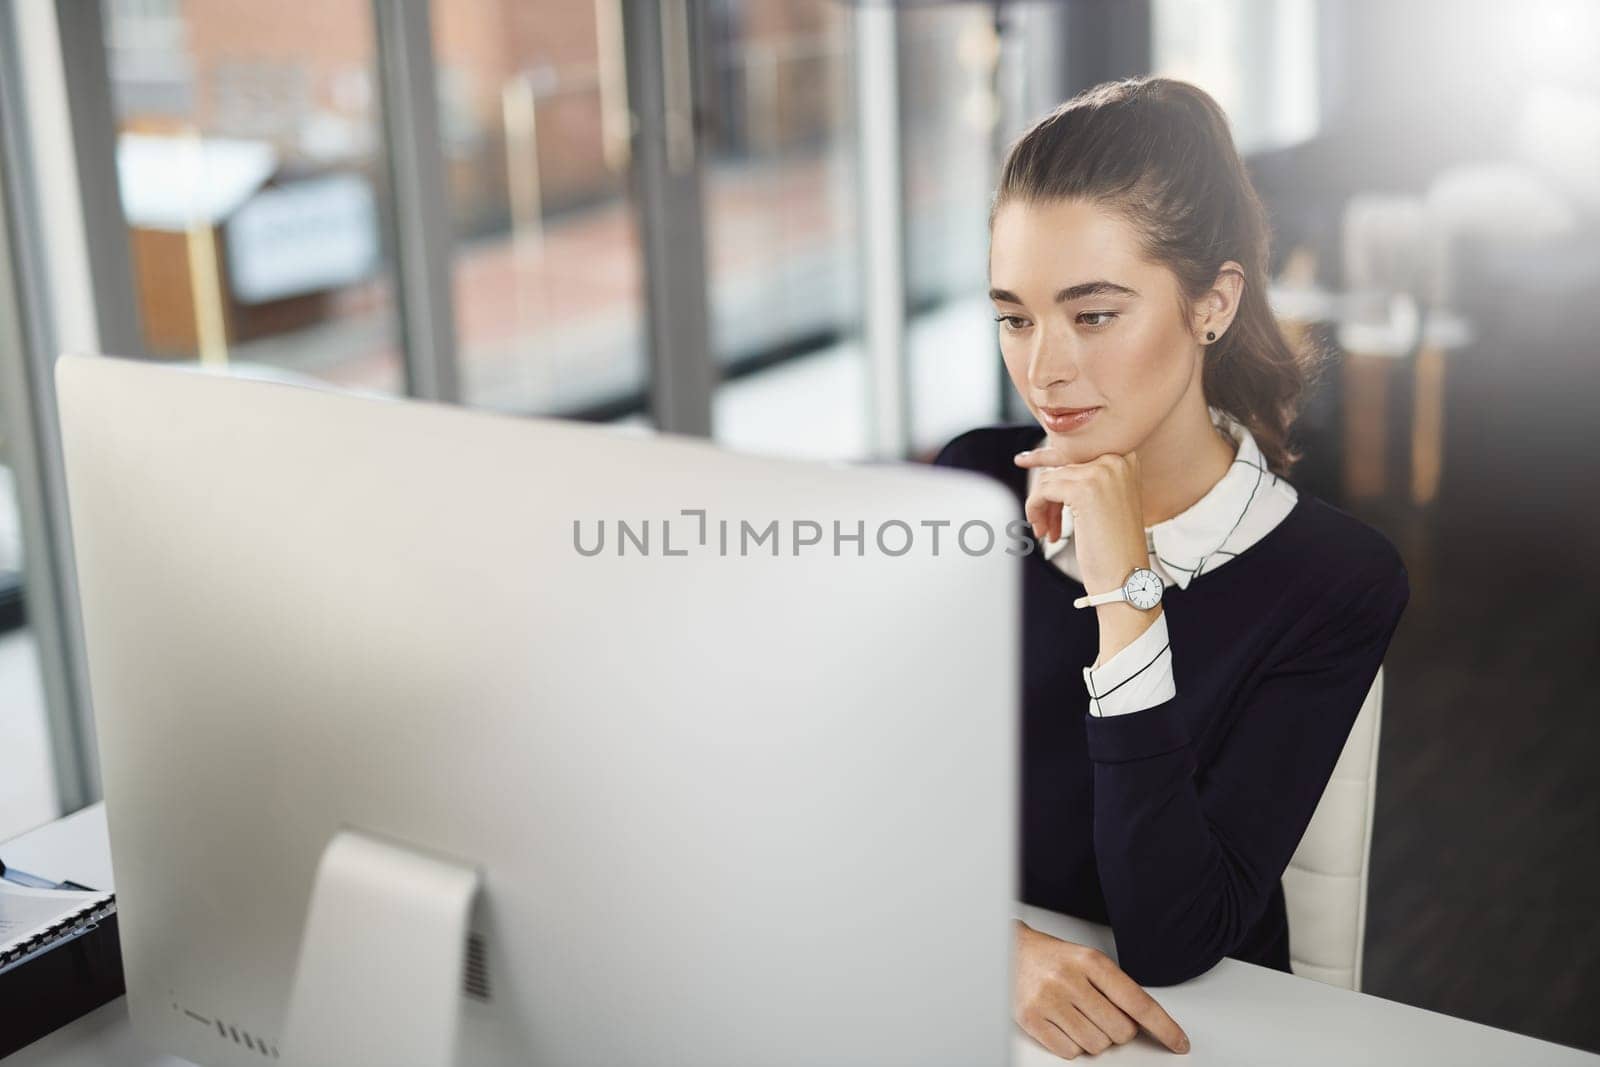 There are new things to learn everyday. an attractive young businesswoman sitting at her desk and looking at her computer screen in a modern office